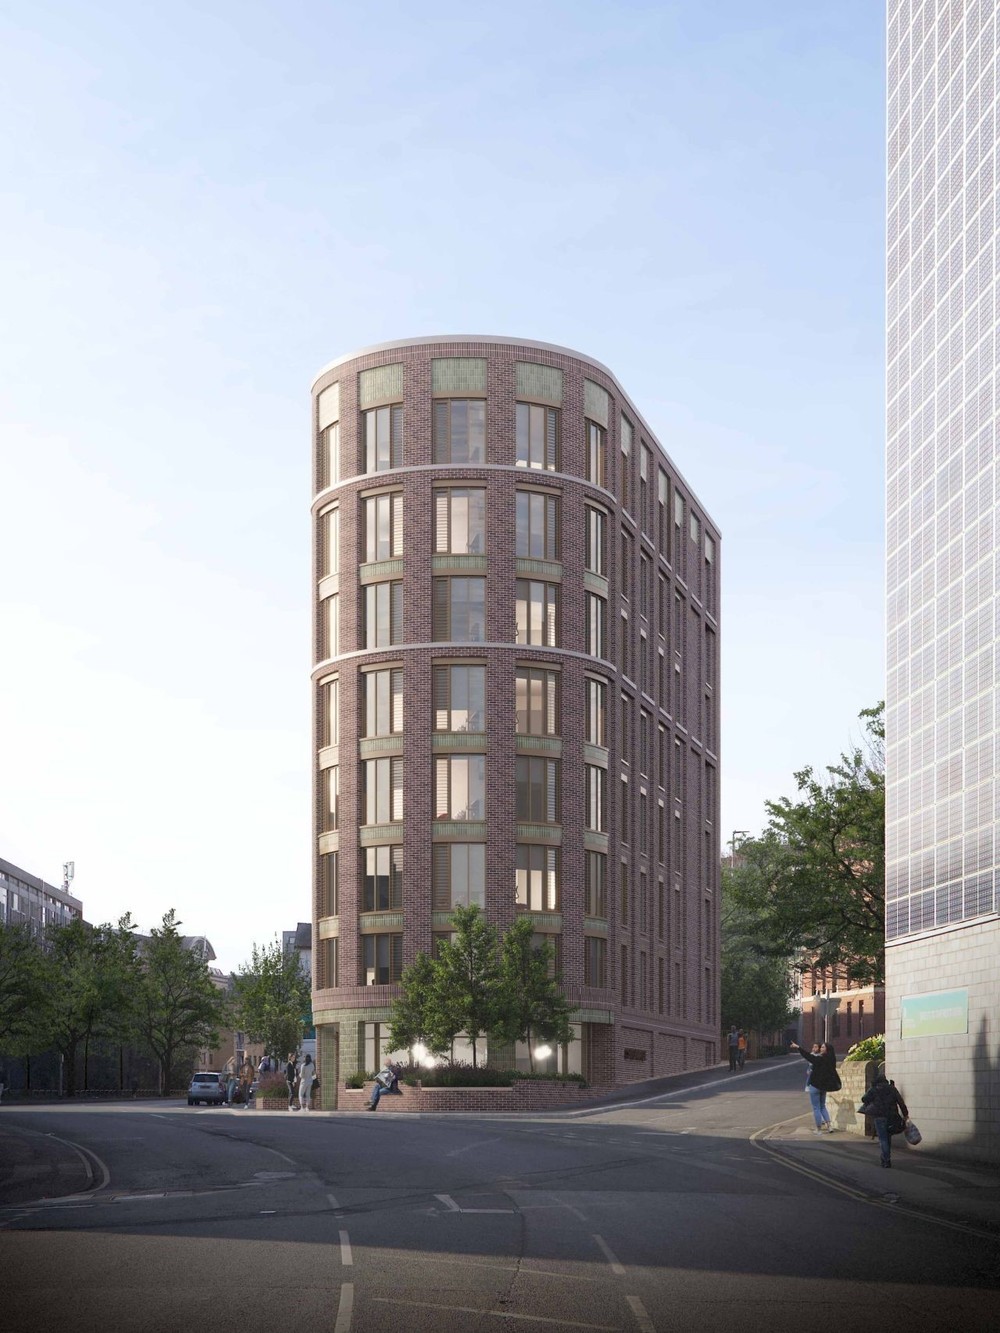 Leeds Student Accommodation Development Submitted for Planning